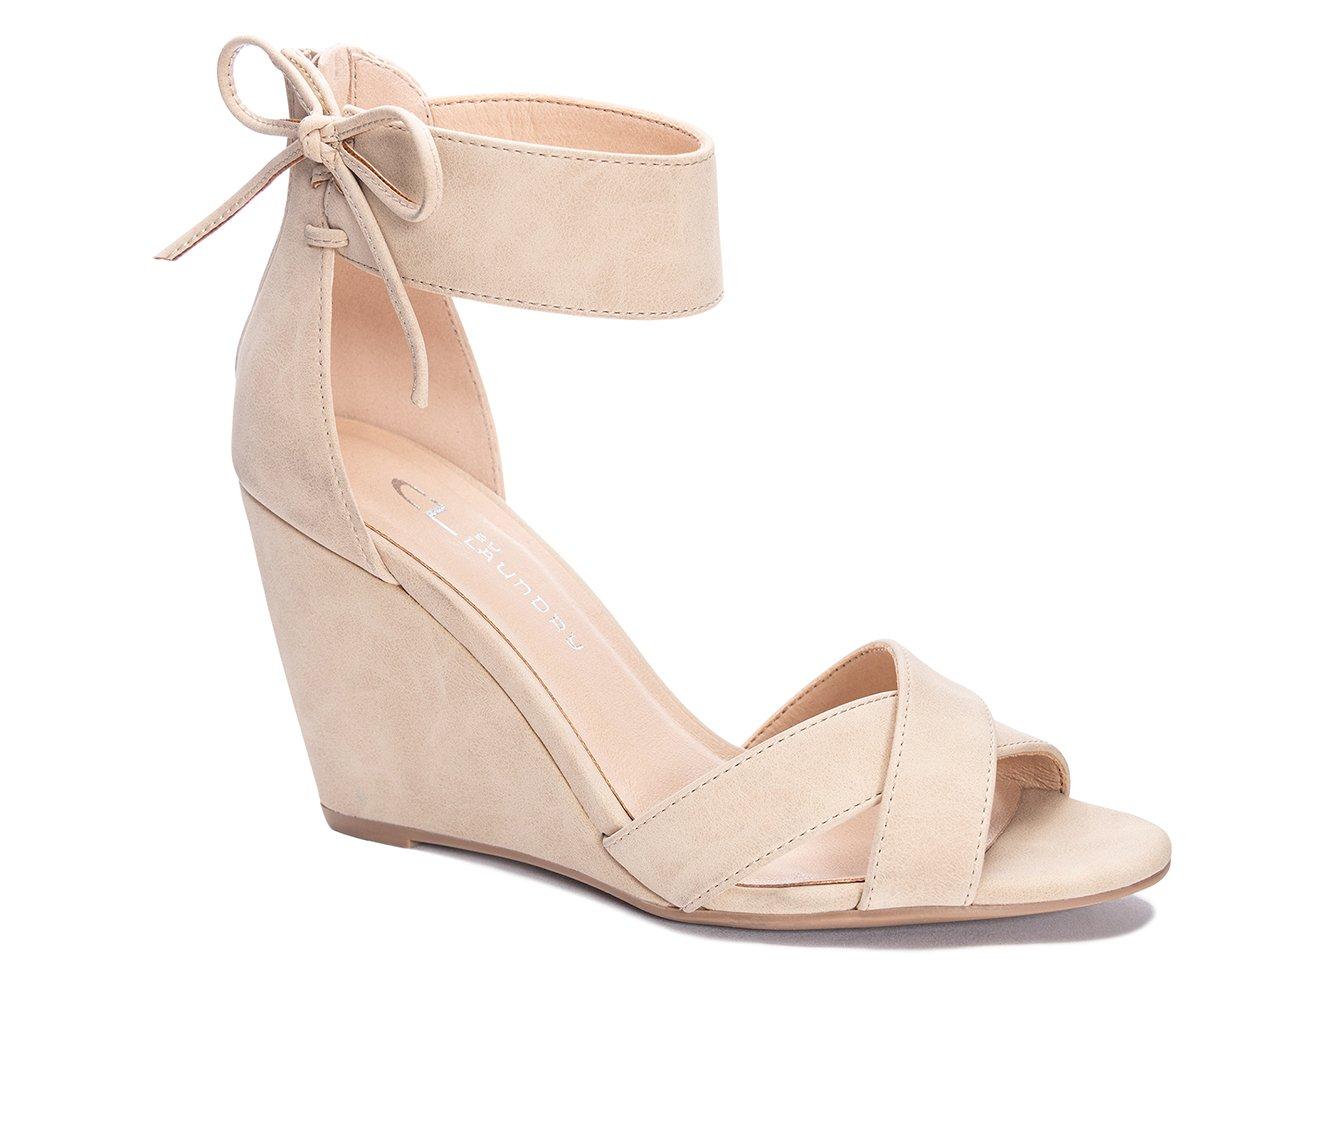 Women's CL By Laundry Canty Dress Wedges